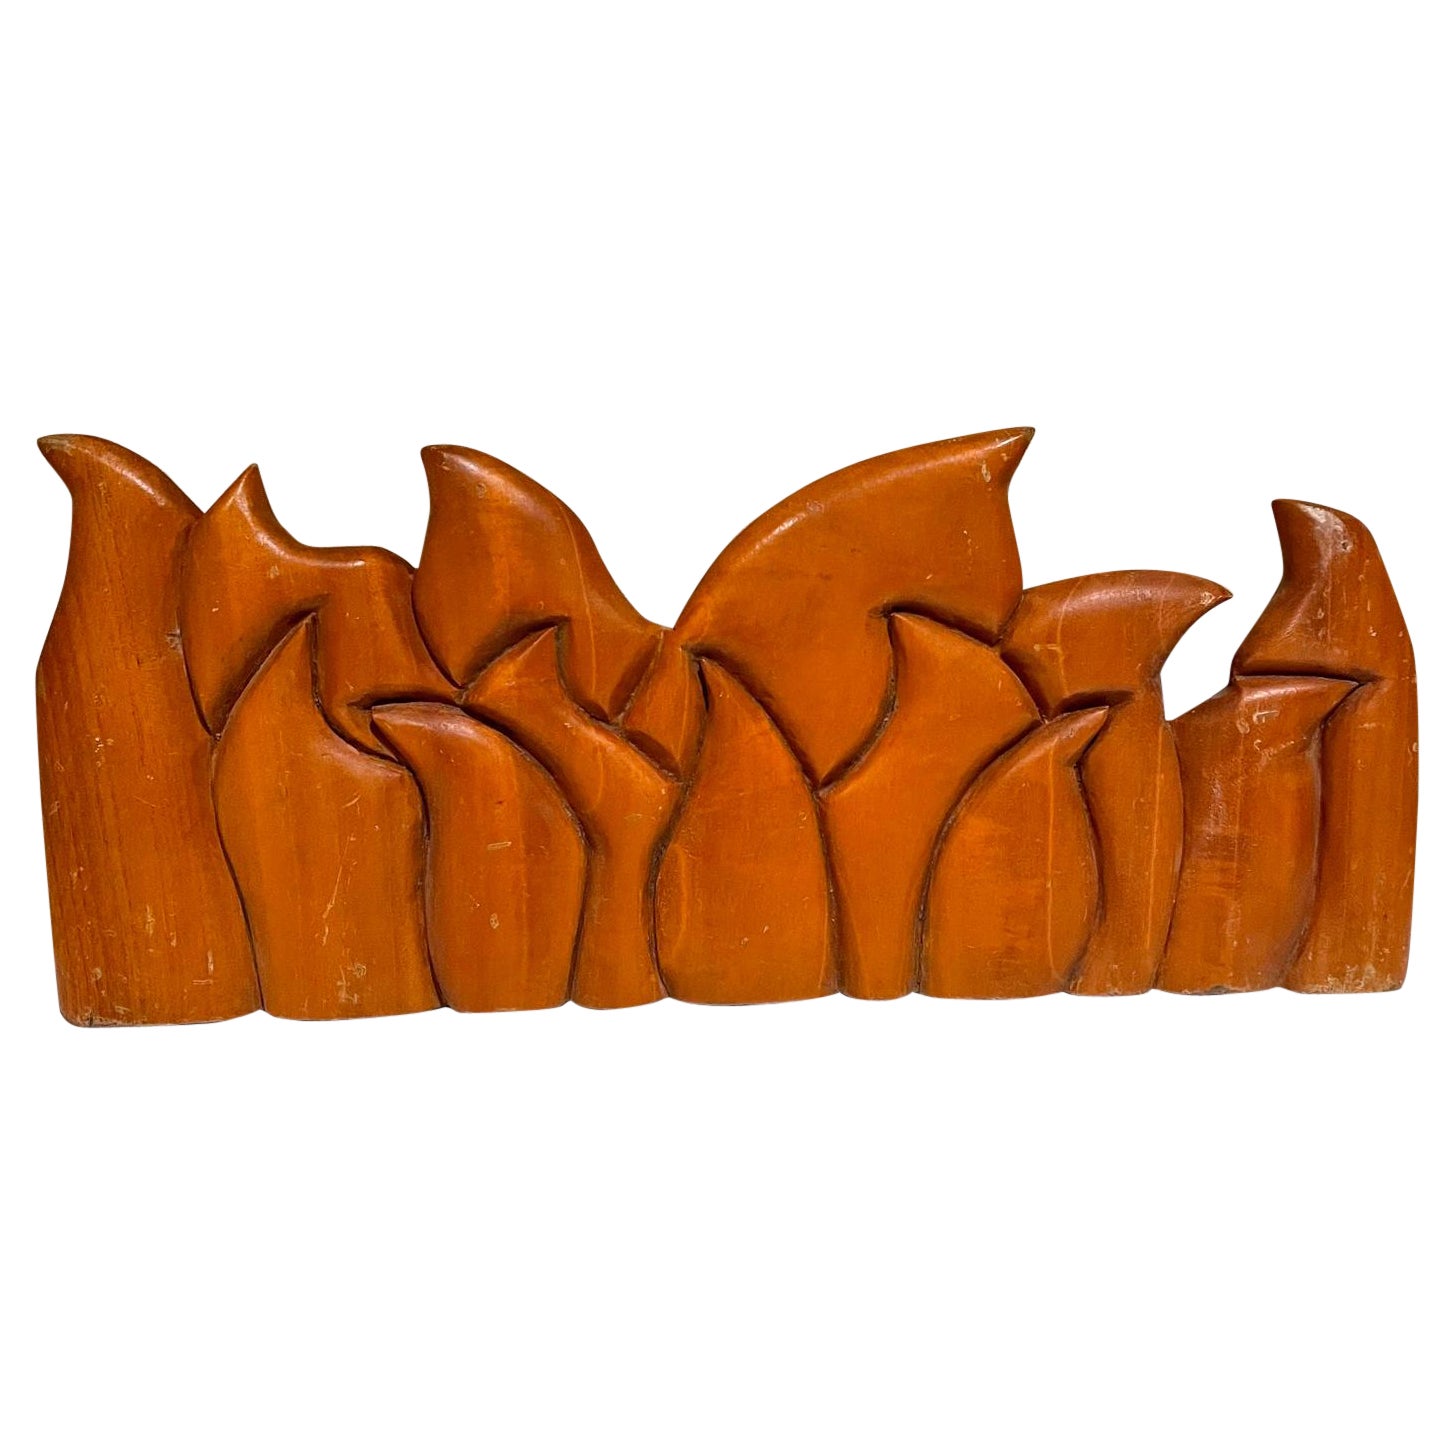 1999 Victor Rozo Last Supper Abstract Wood Sculpture Mexico DF For Sale